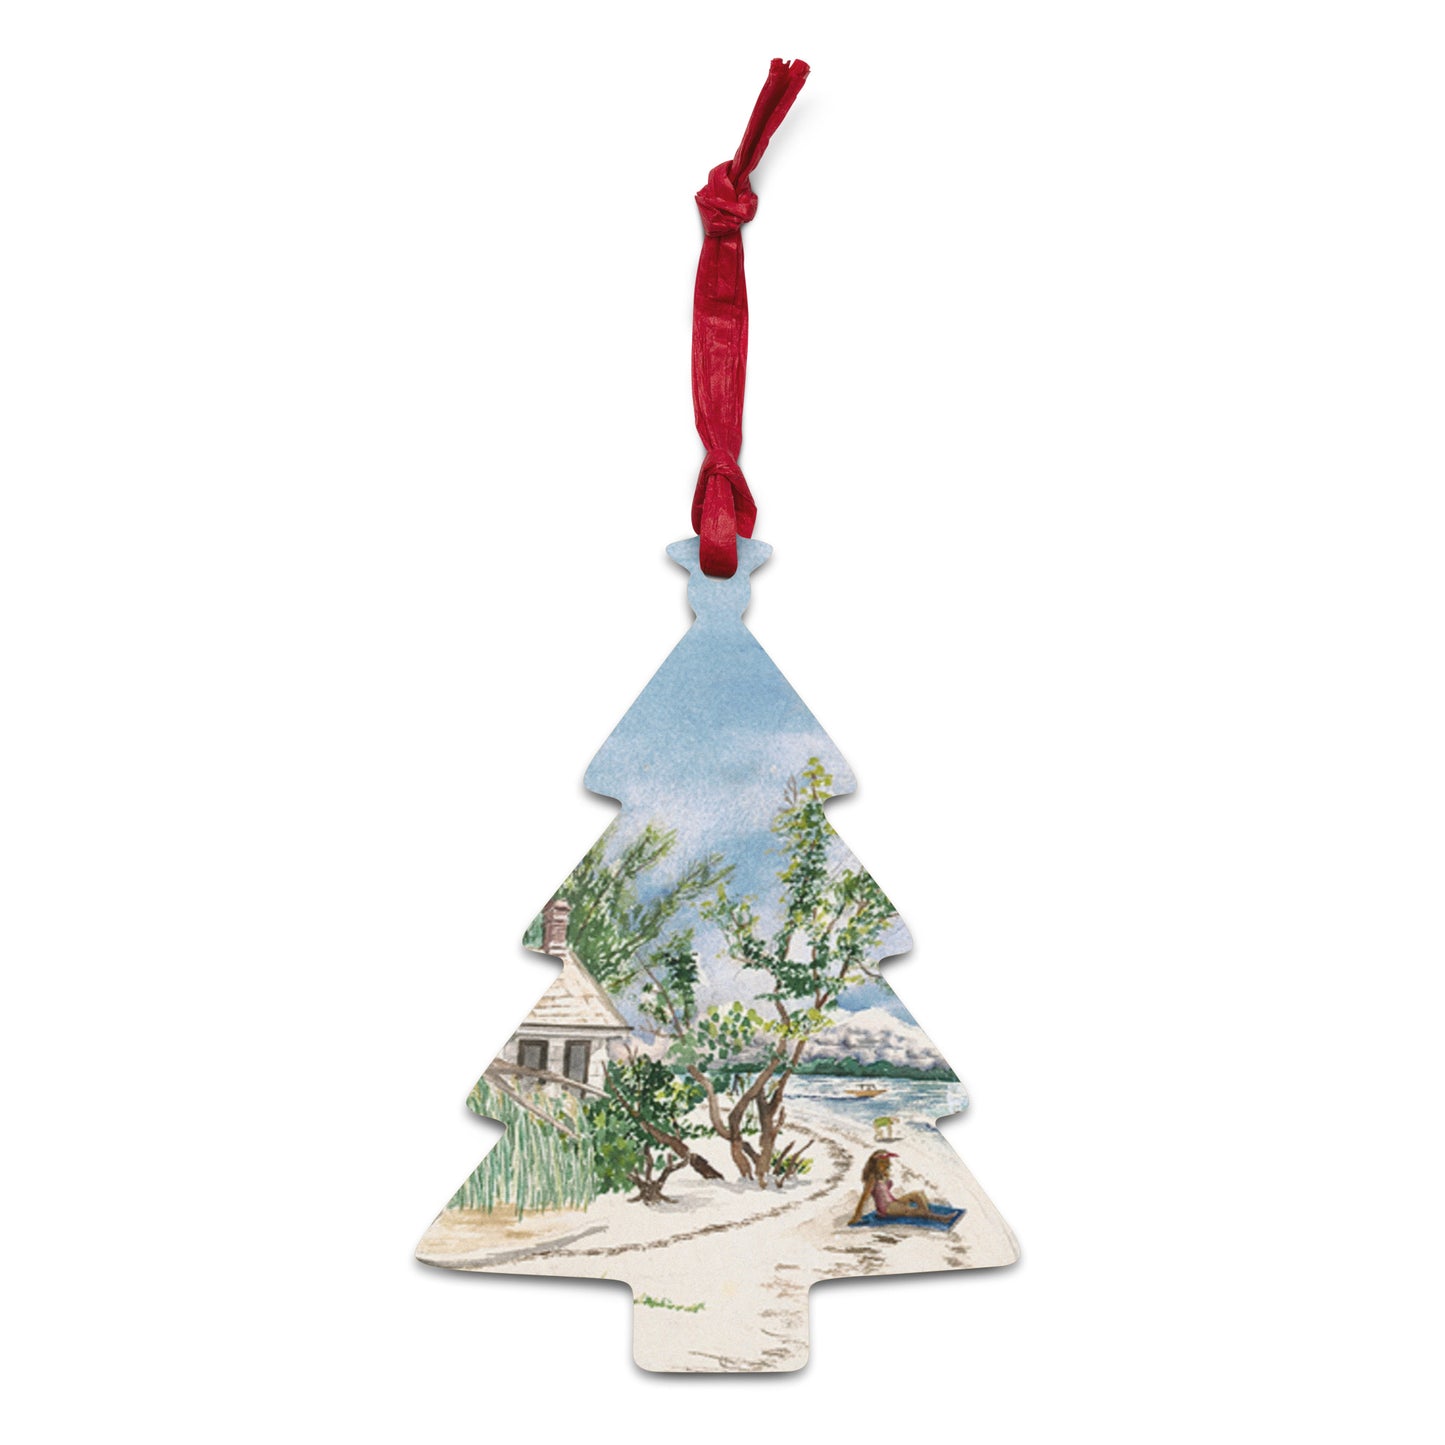 Sanibel Christmas Ornaments (all 6 shapes have Sanibel Lighthouse on front!)